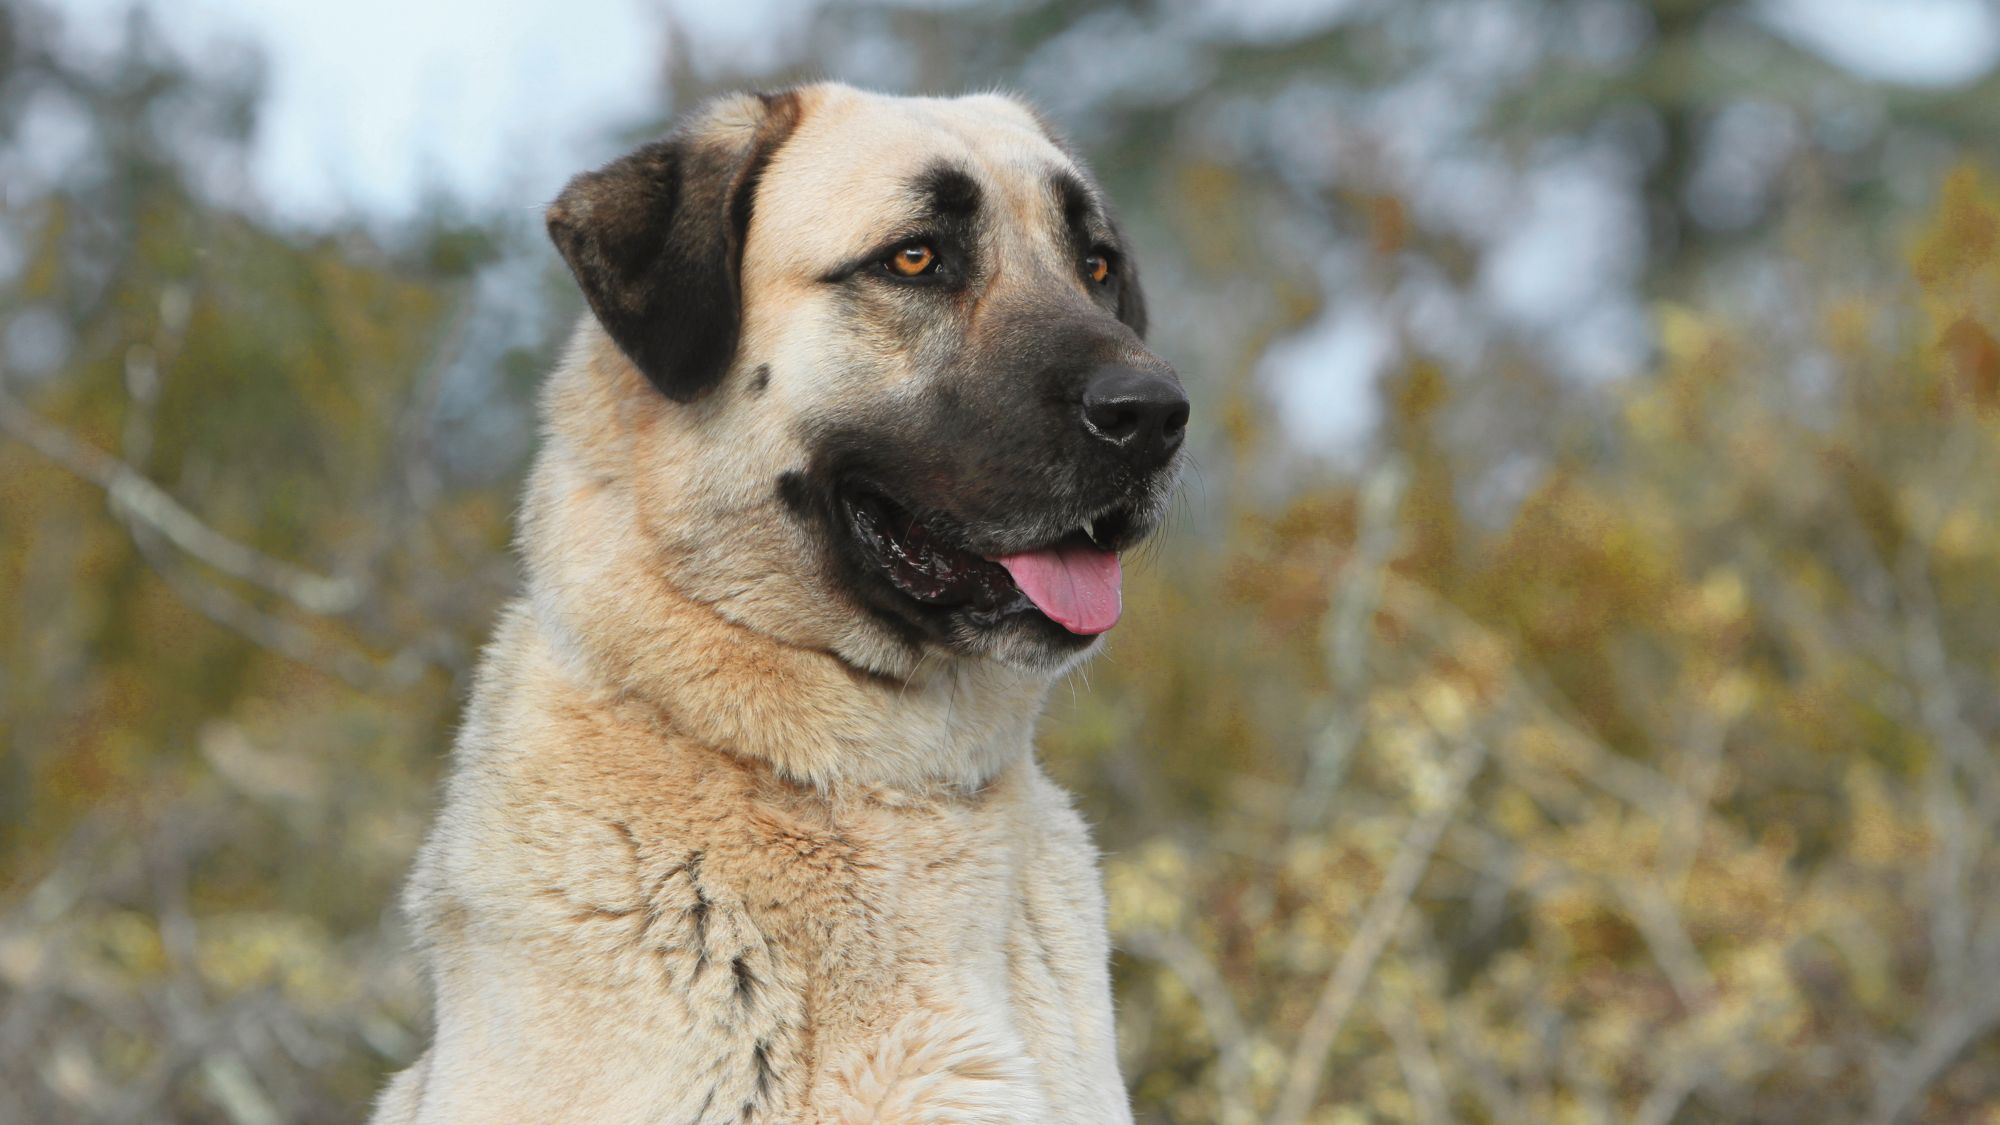 Anatolian Shepherd sat looking into the distance with its tongue out